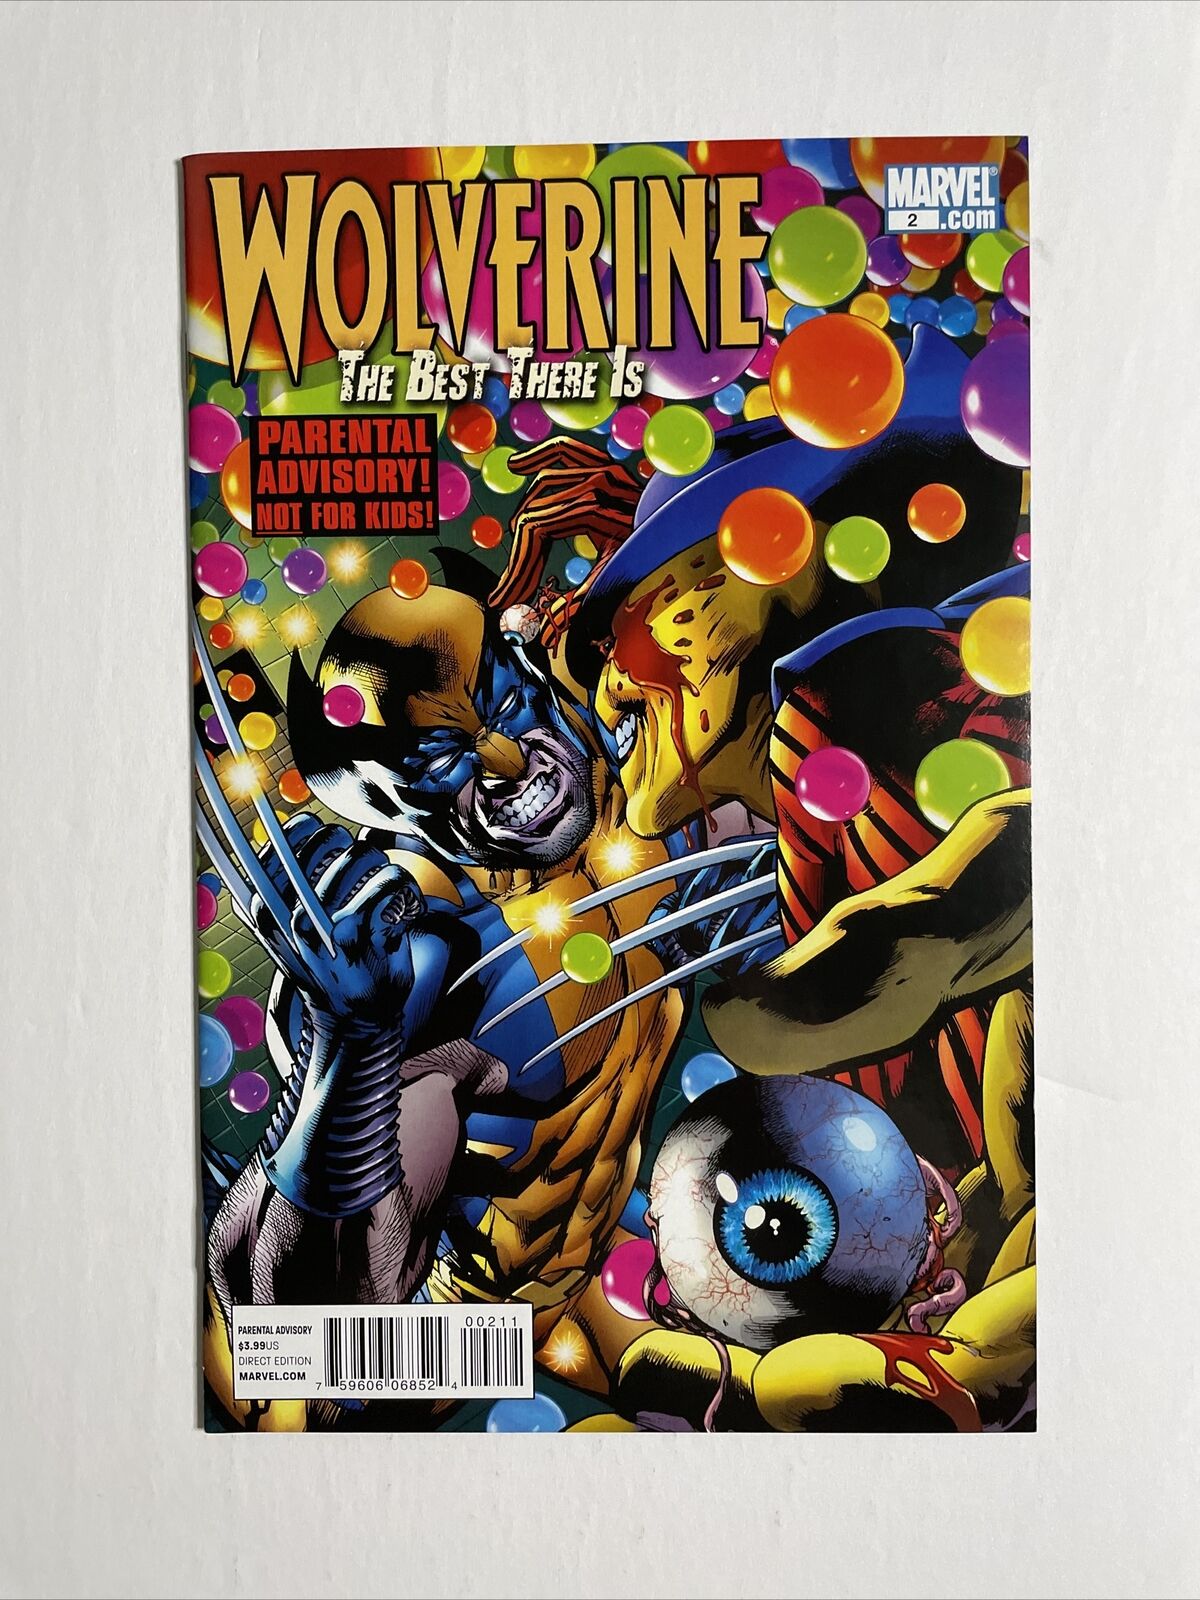 Wolverine: The Best There Is #2 (2011) 9.4 NM Marvel High Grade Comic Book